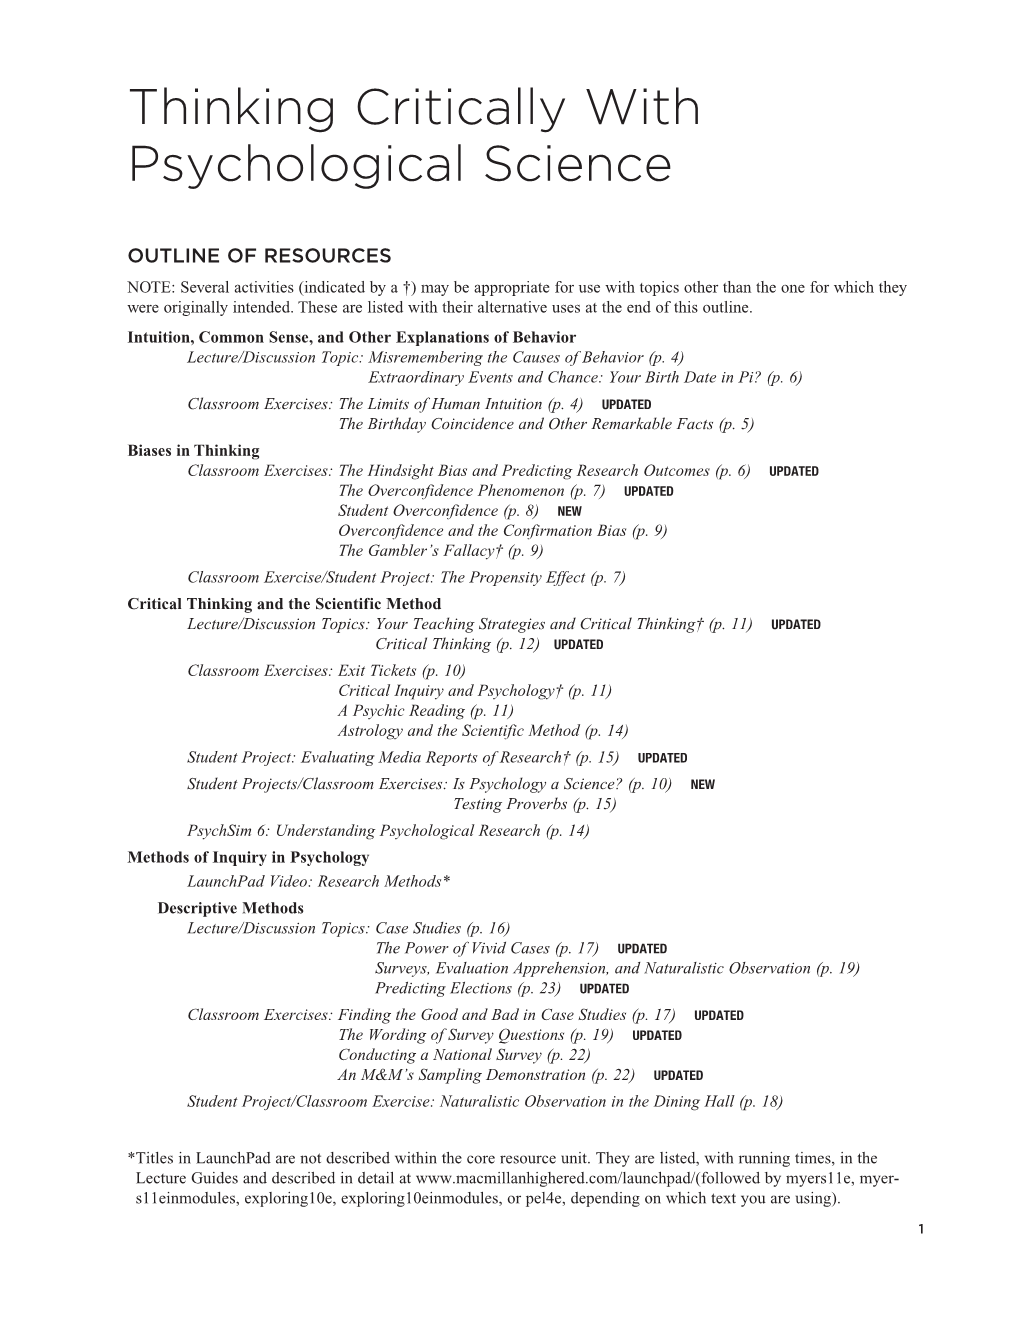 Thinking Critically with Psychological Science